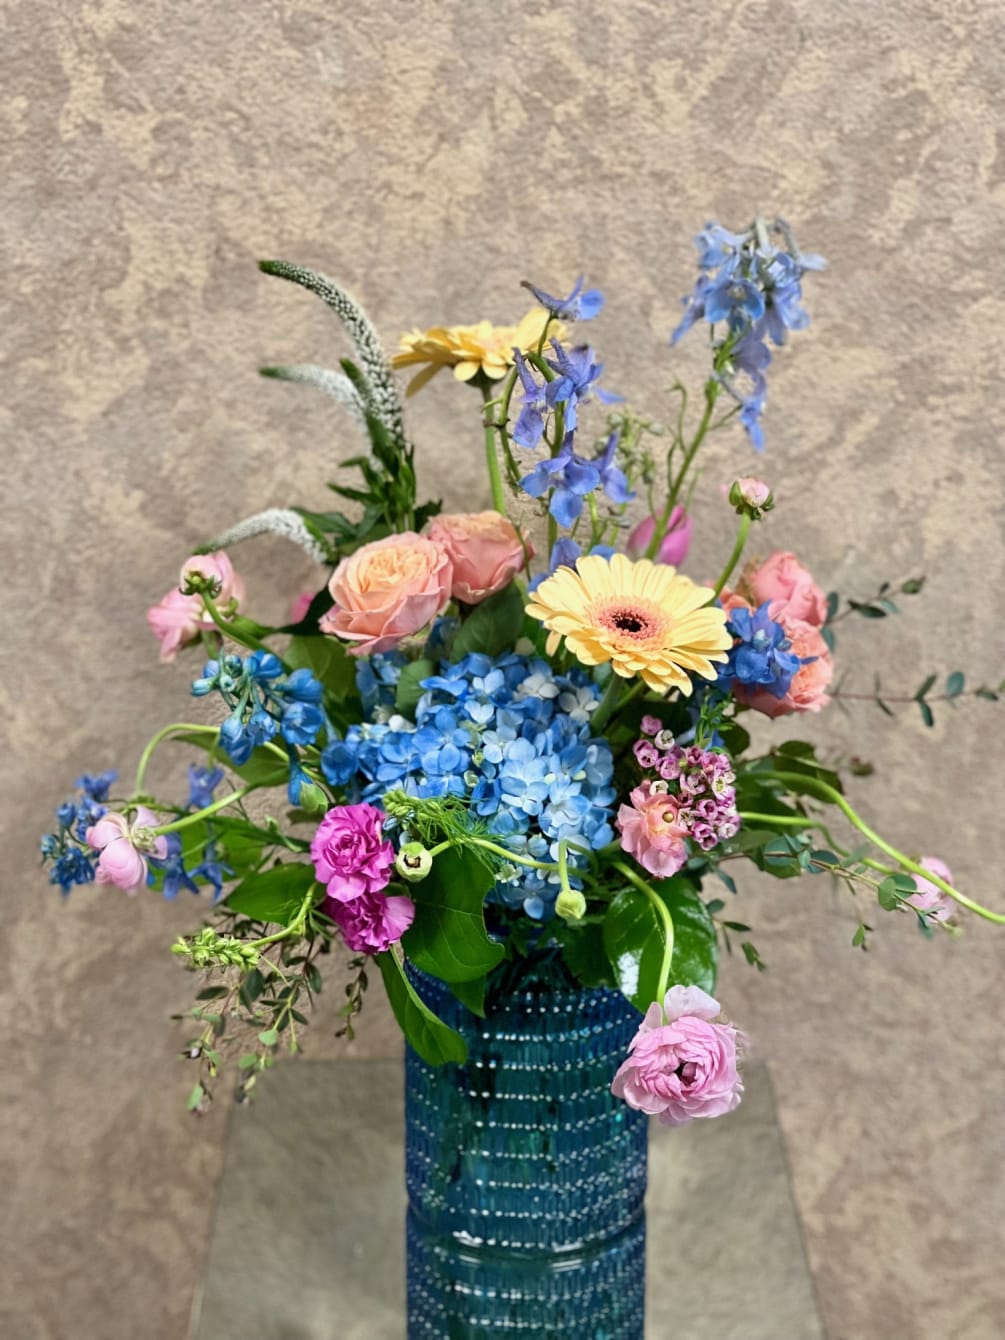 This design is great for spring birthdays.
Recipe: Soft Hues with Blue Hydrangea